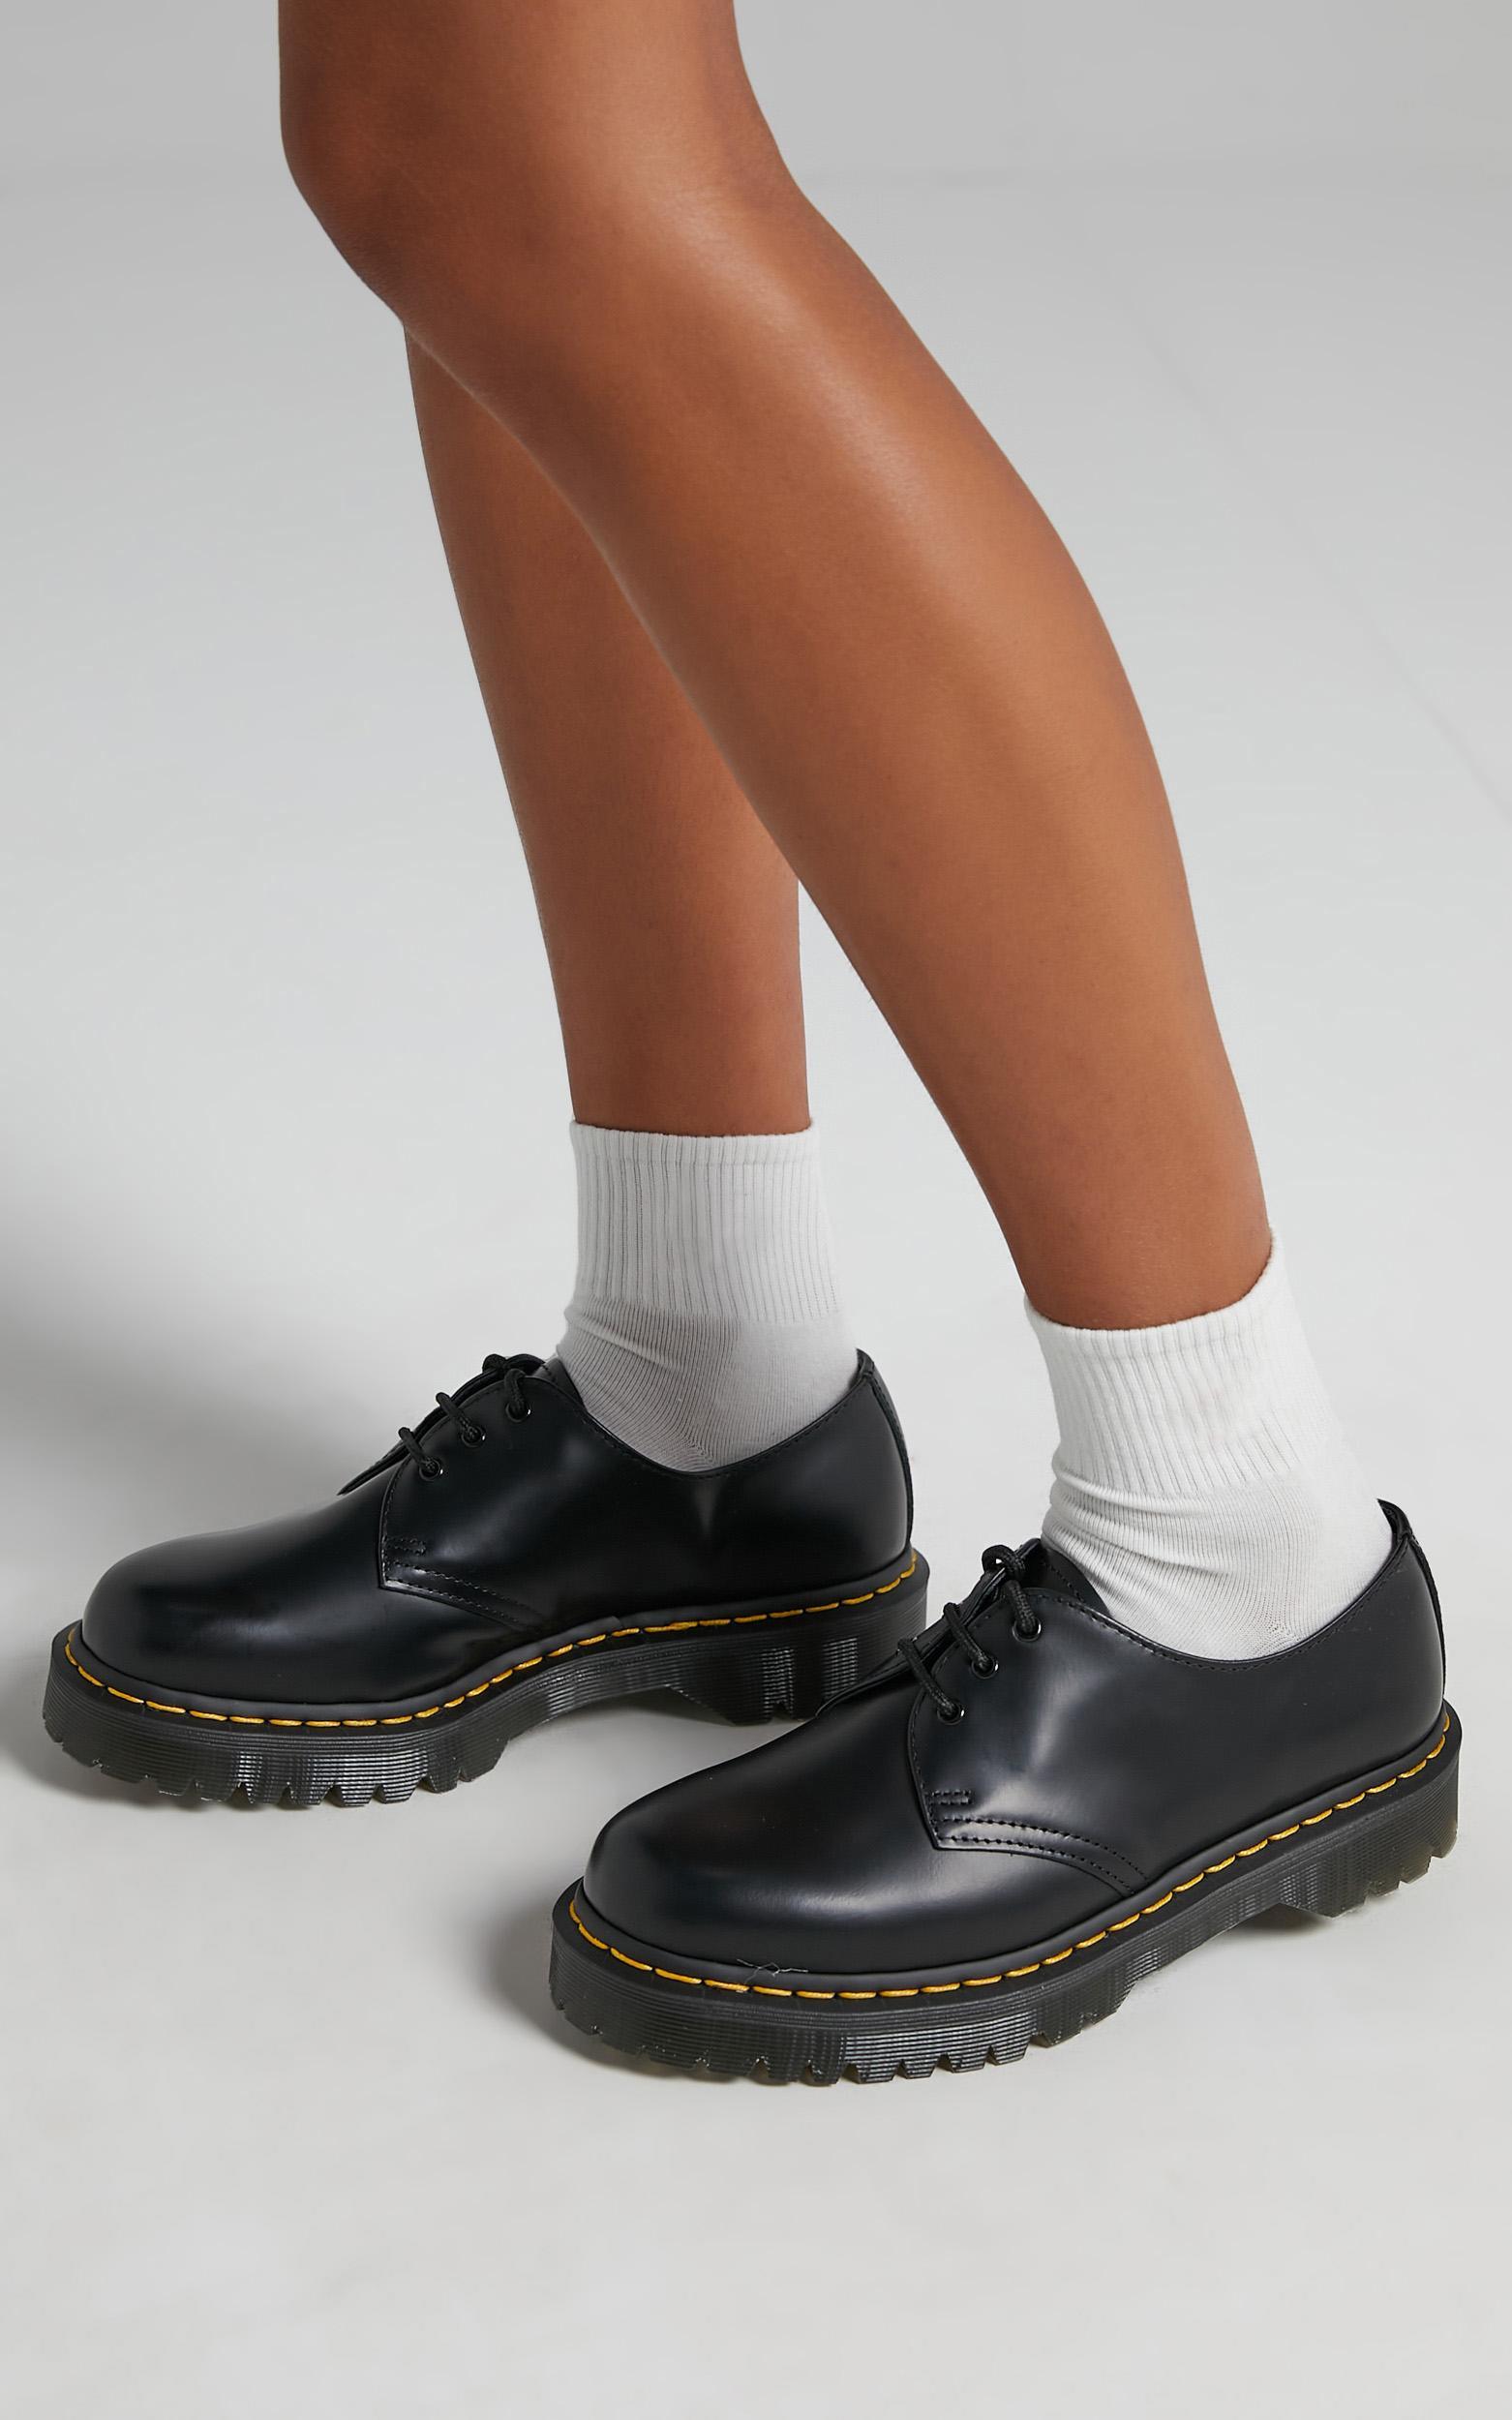 Dr. Martens - 1461 3 Eye Shoe in Smooth